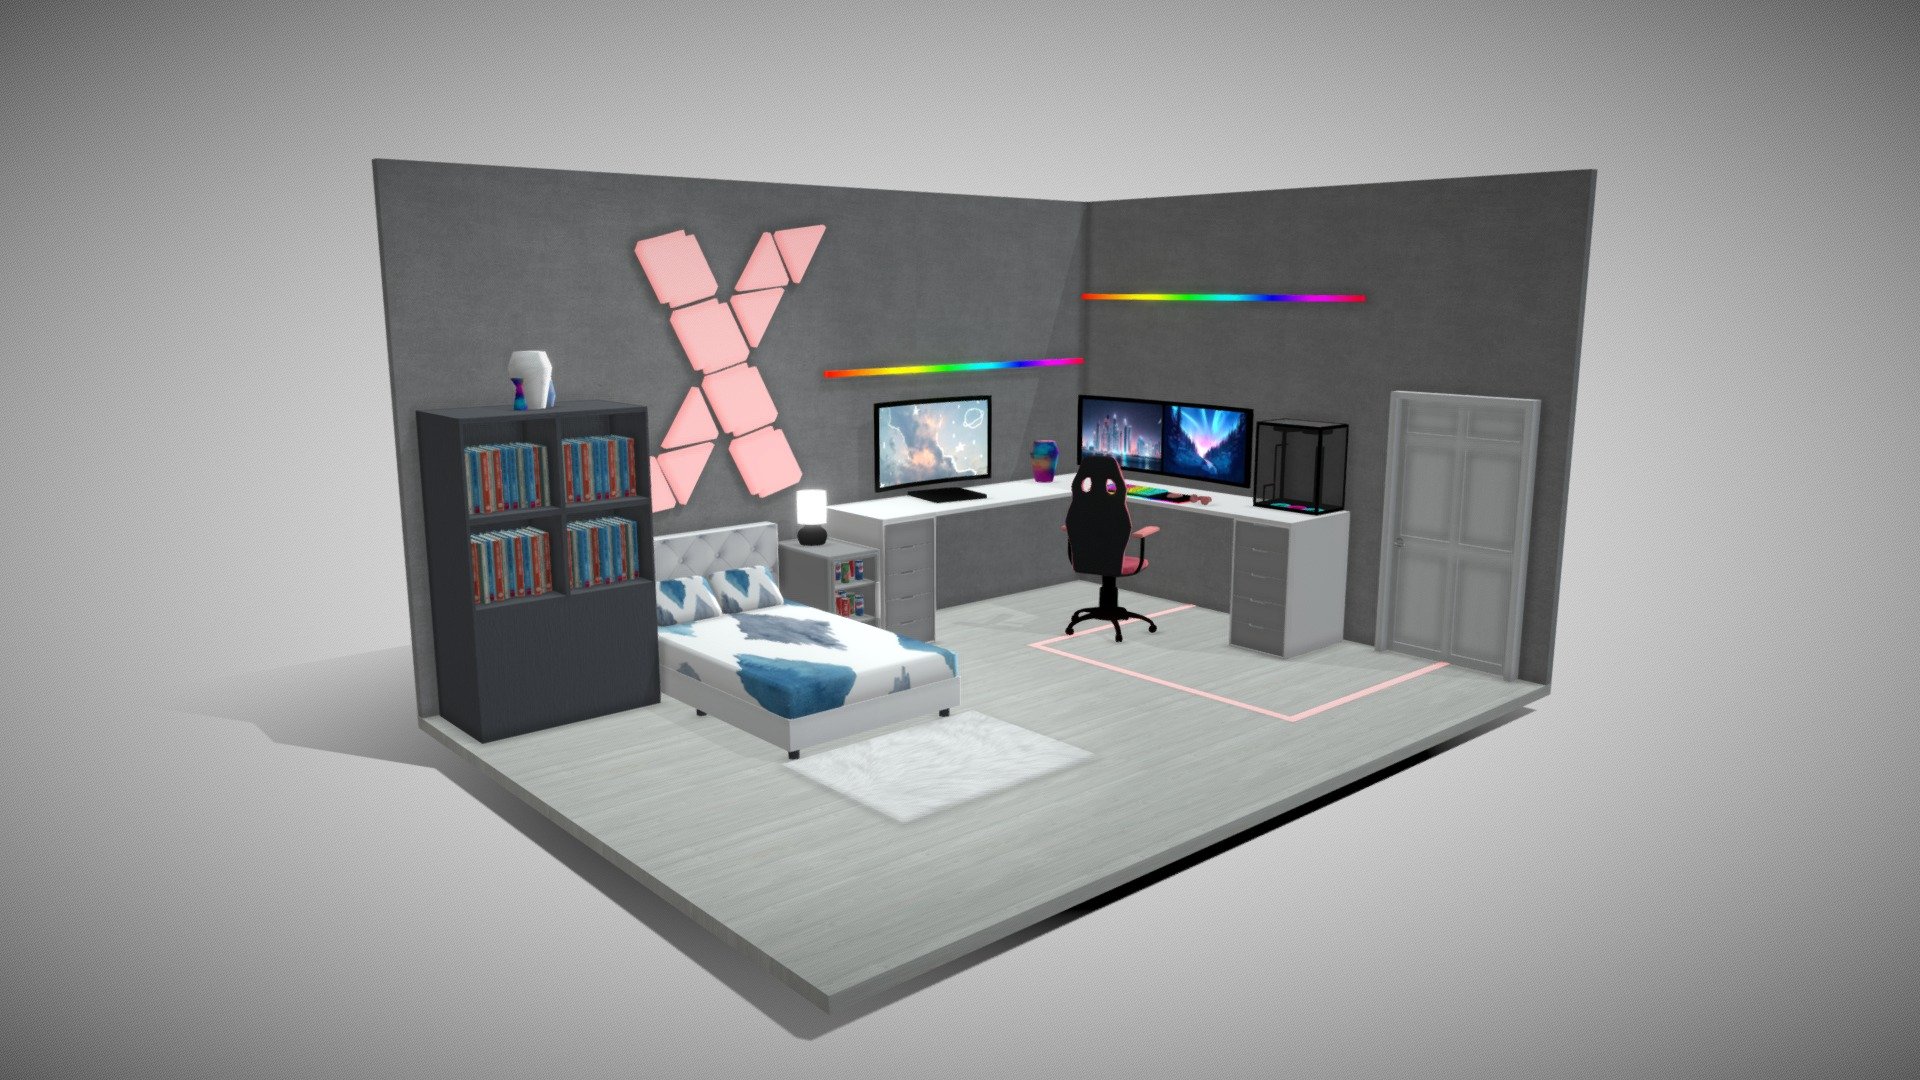 This is a gaming room scene that I created using Maya 3d model